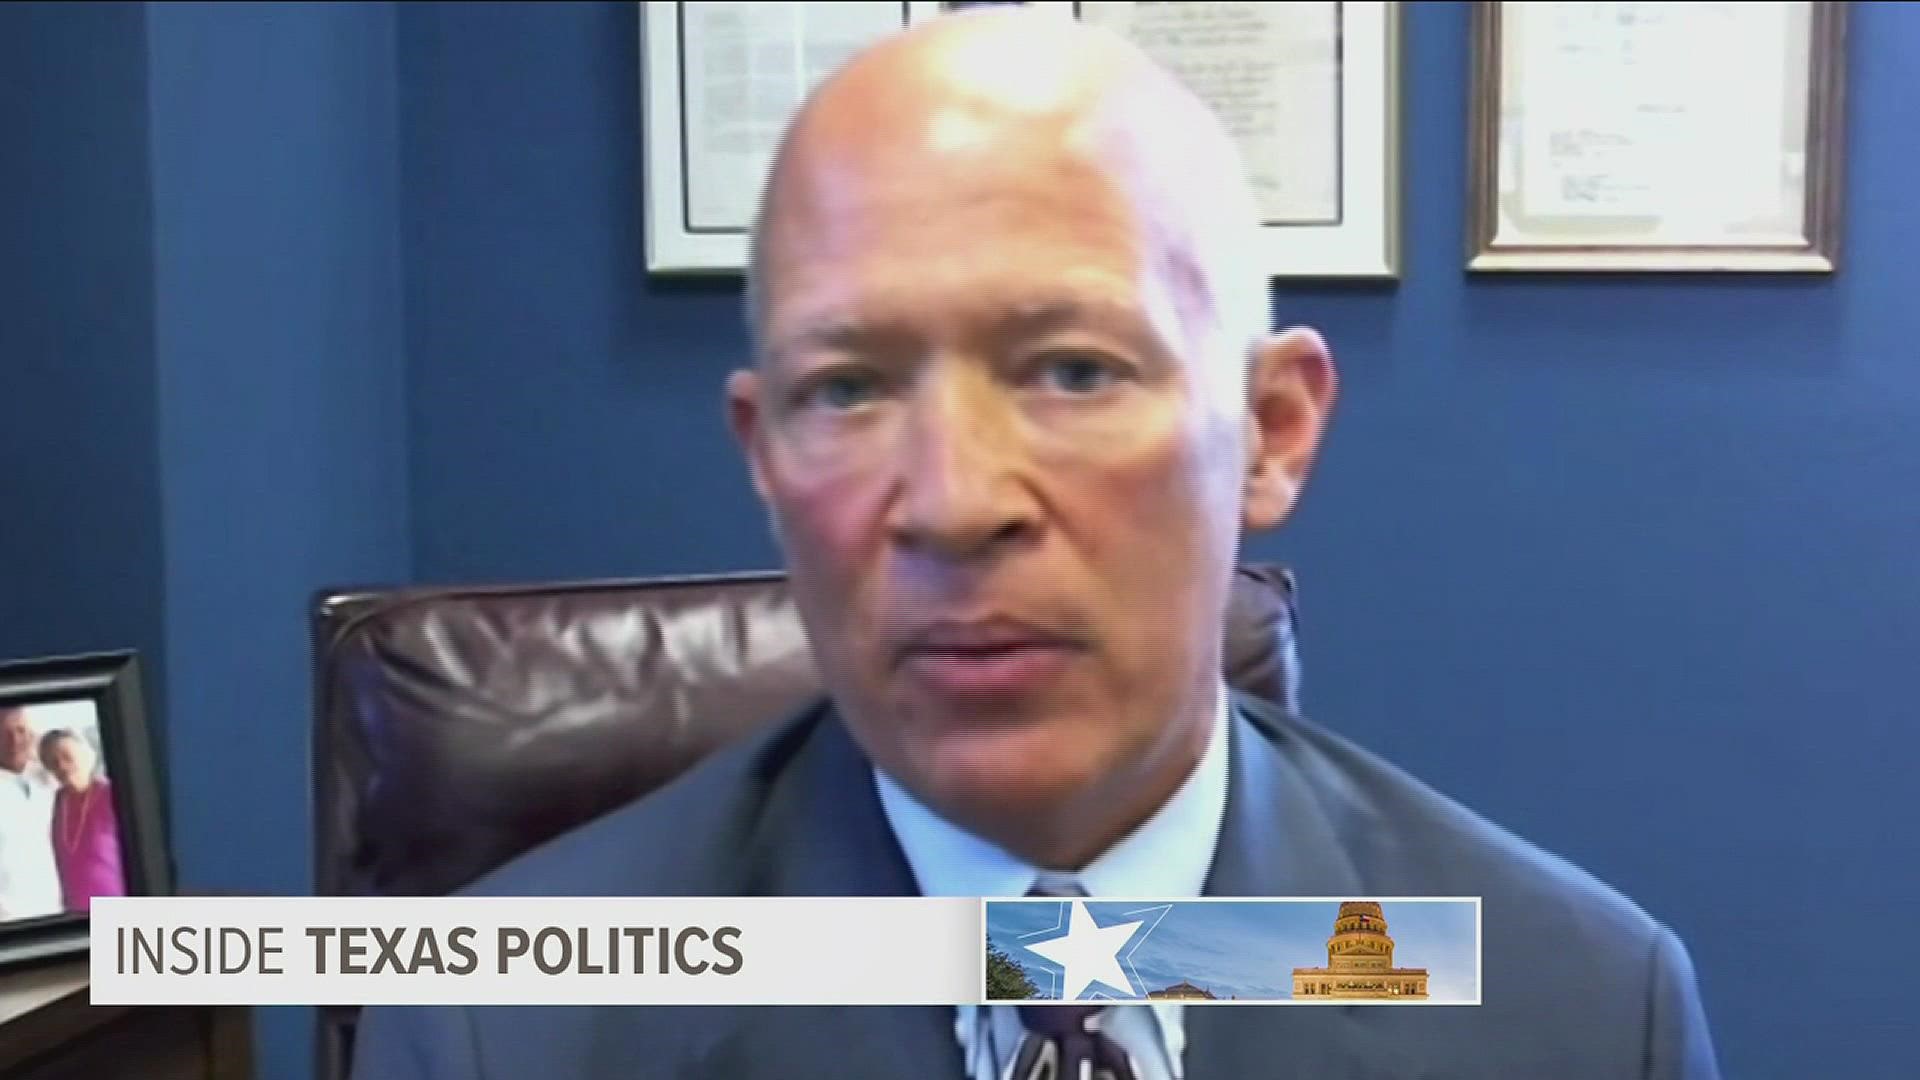 Incumbent Dallas County District Attorney John Creuzot recently made a decision that’s playing a large role in the campaign leading up to the March 1 primary.